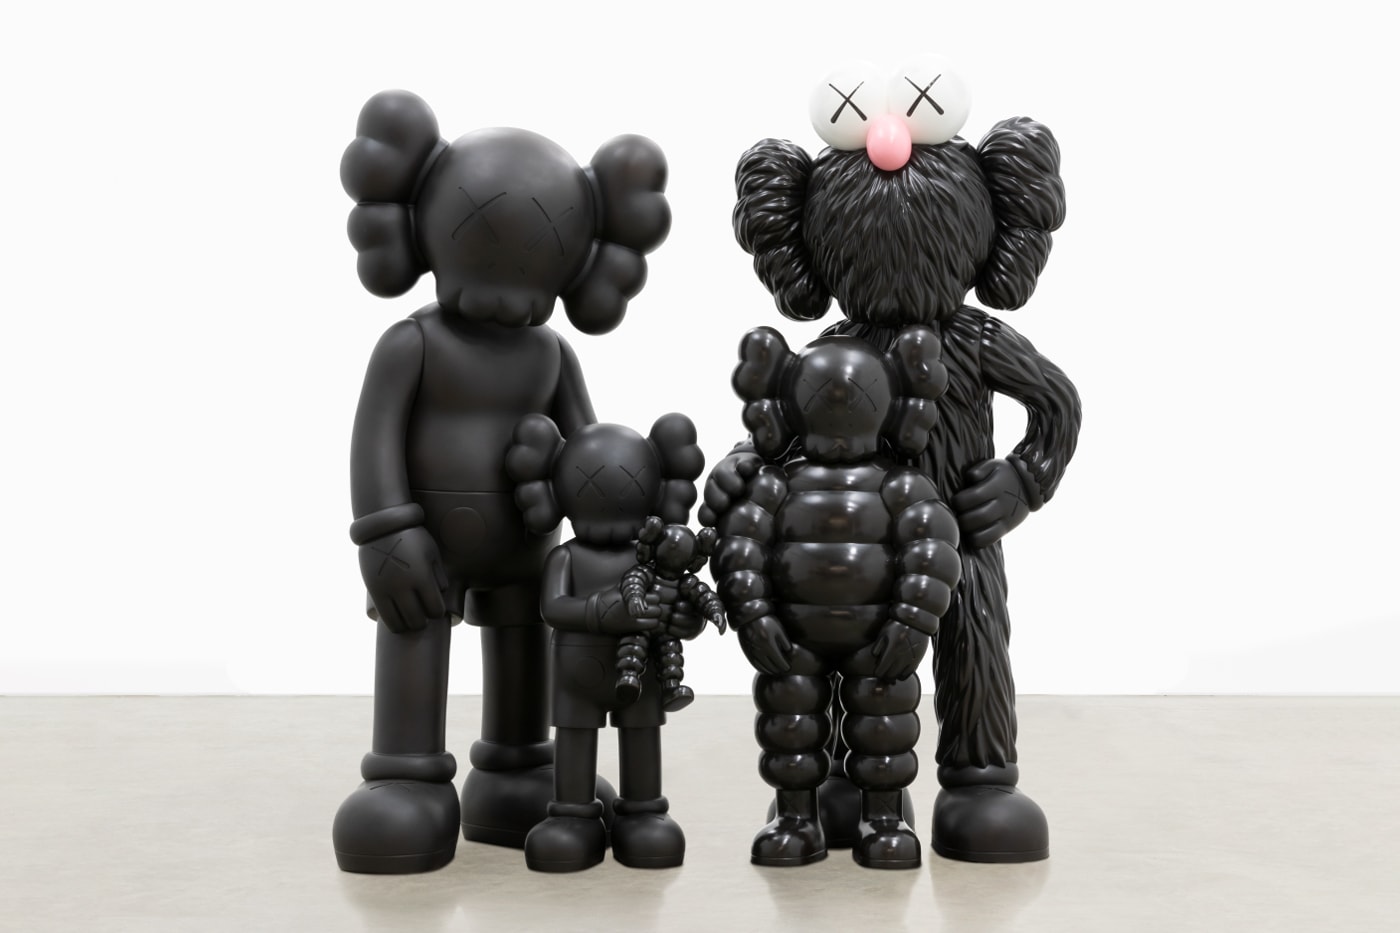 KAWS: Family To Make Canadian Museum Debut at the Art Gallery of Ontario ago canada julian cox brian donnelly life size sculptures